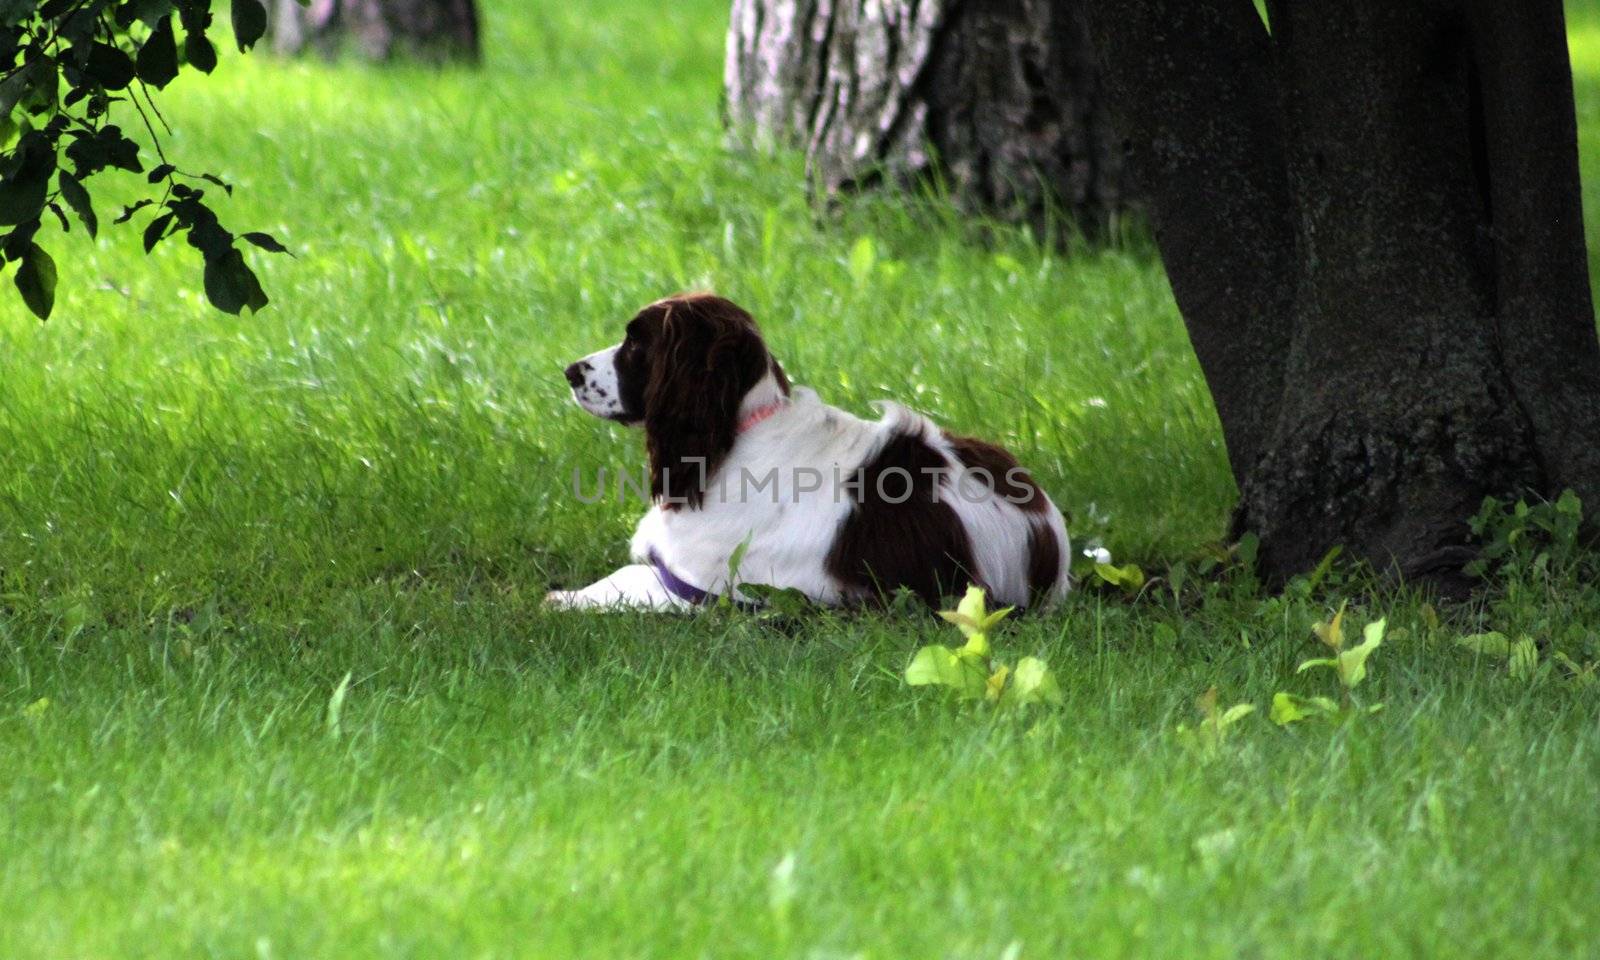 Dog taking well deserved rest under a tree